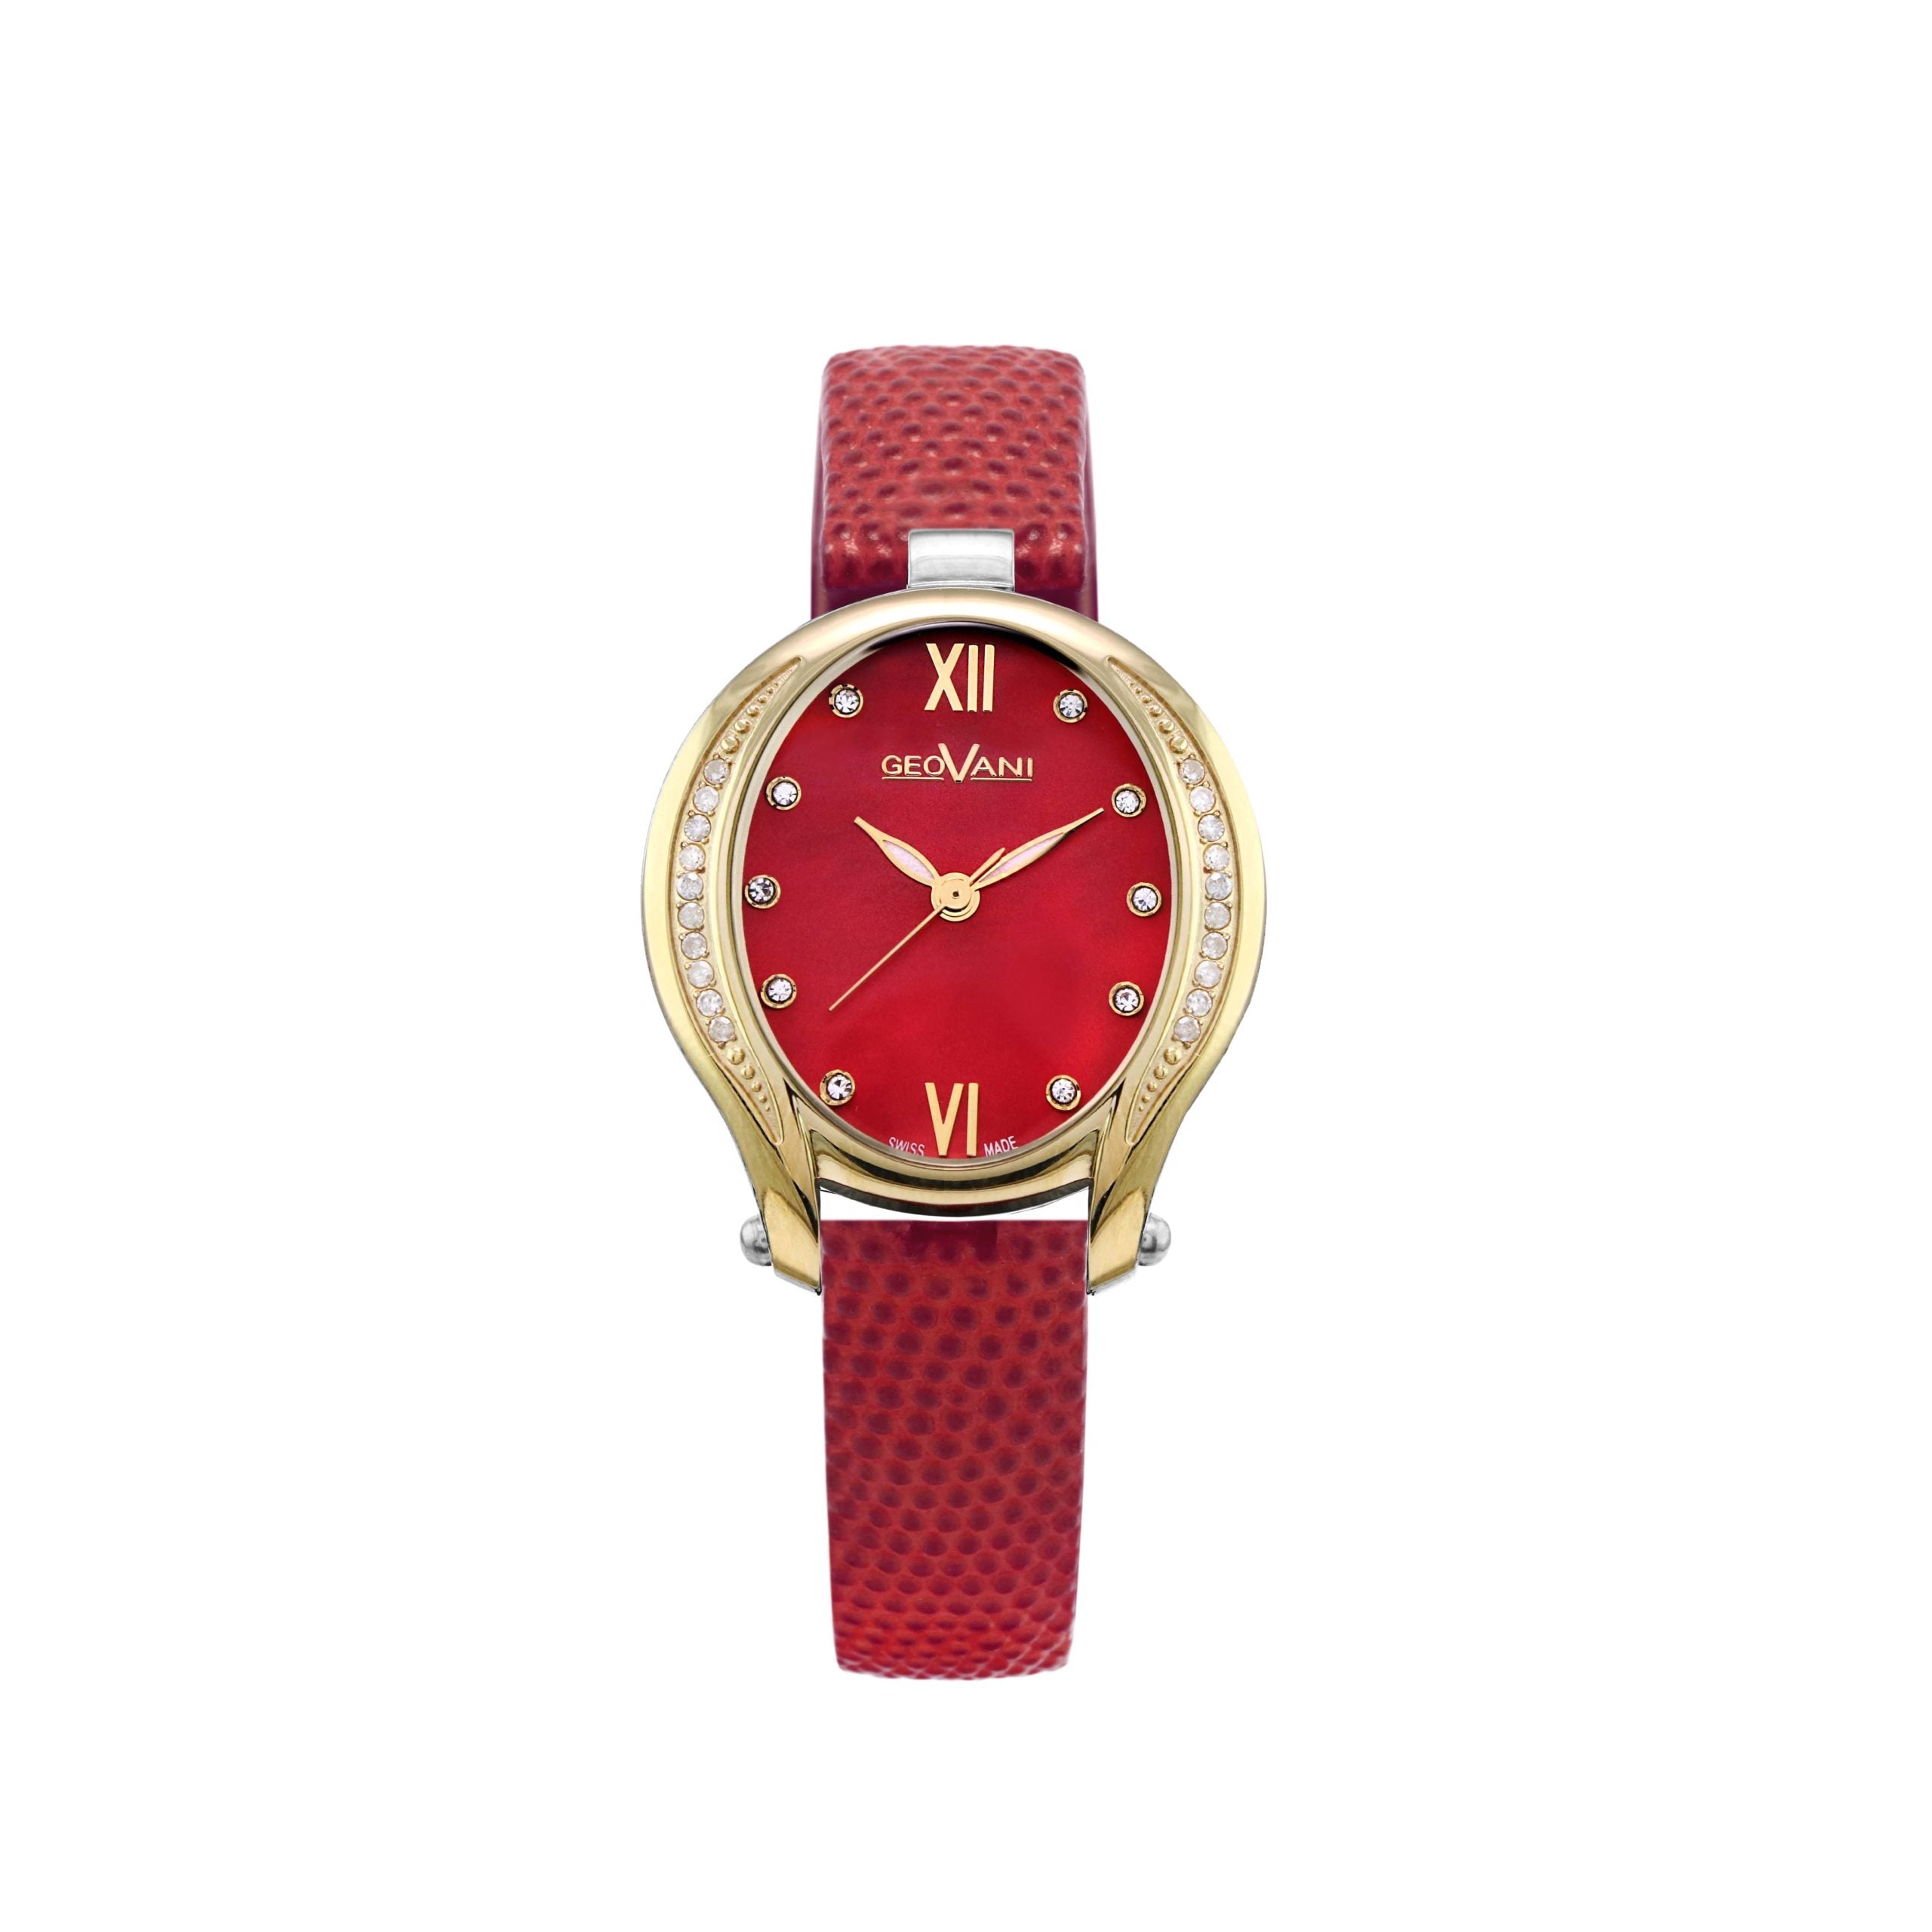 Giovanni Women's Swiss Quartz Watch with Pearly Red Dial - GEO-0020